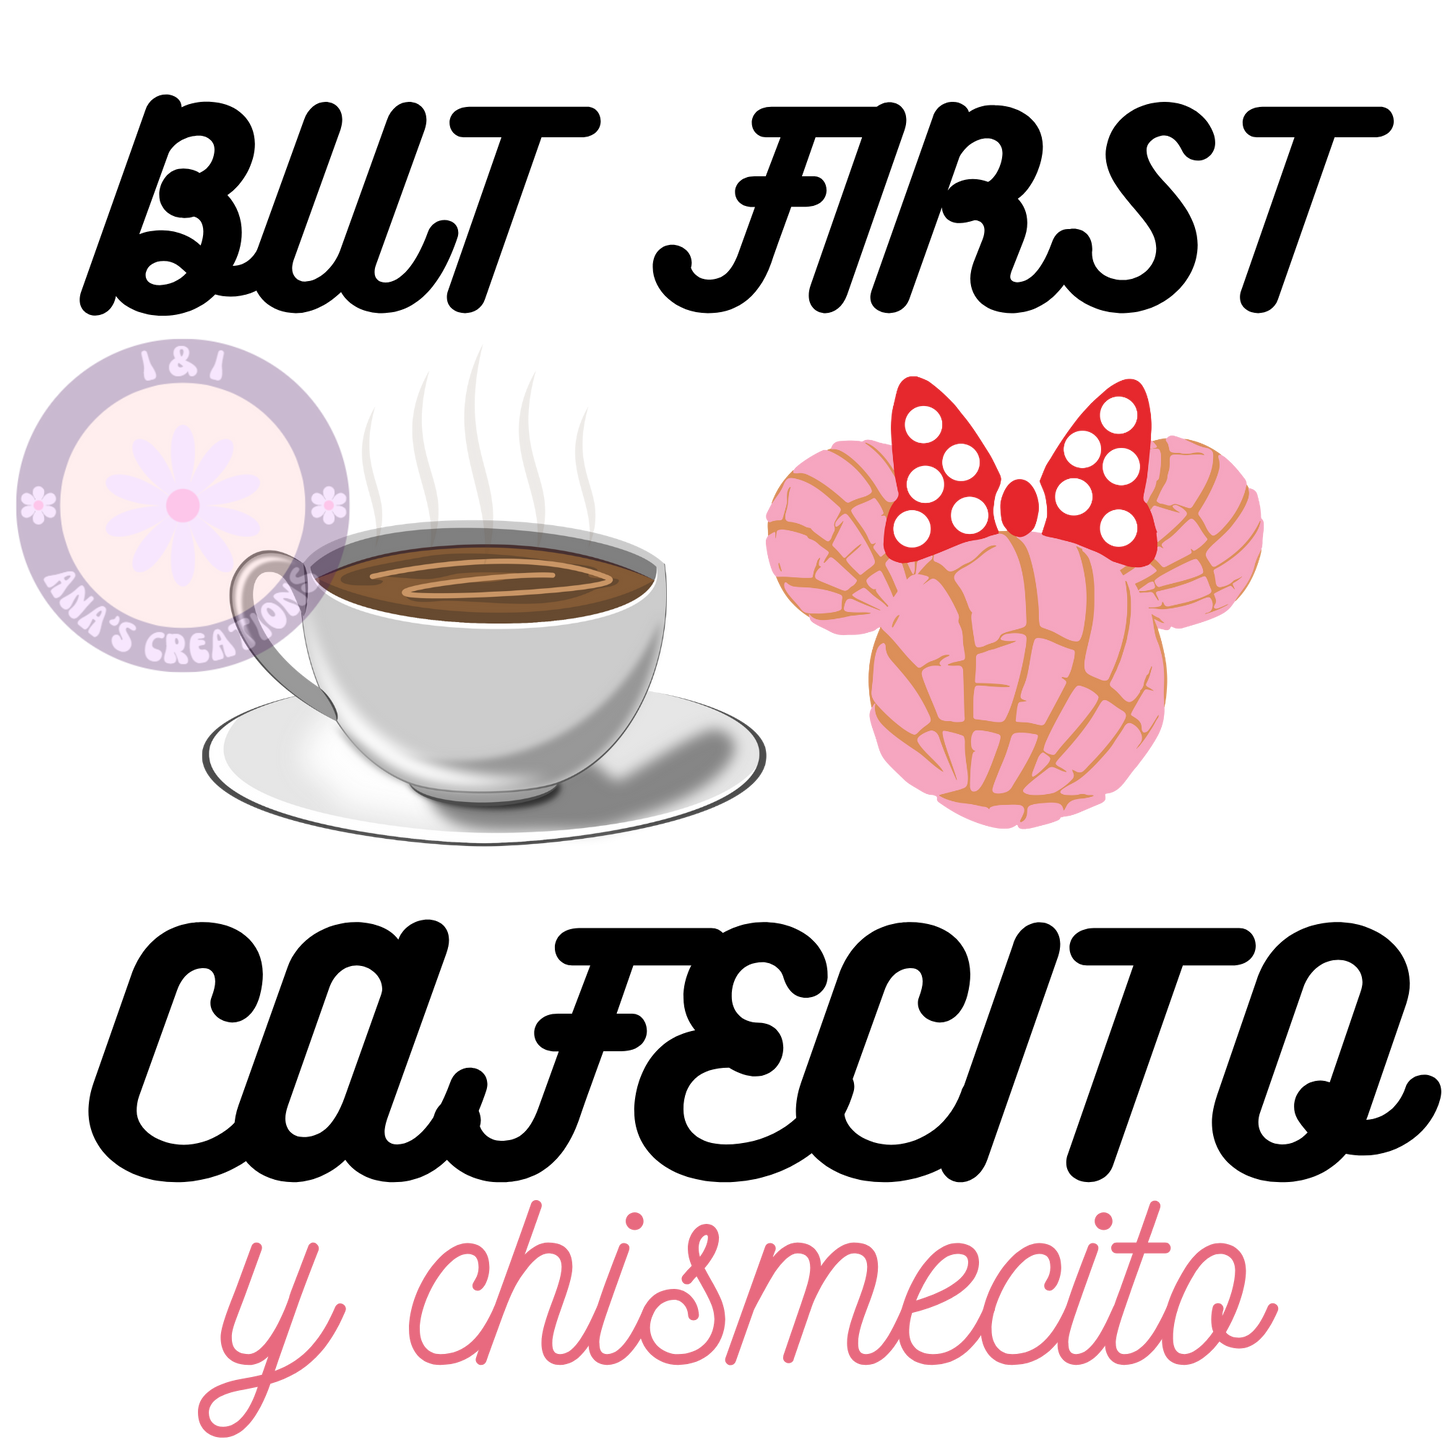 But First Cafecito y Chismecito